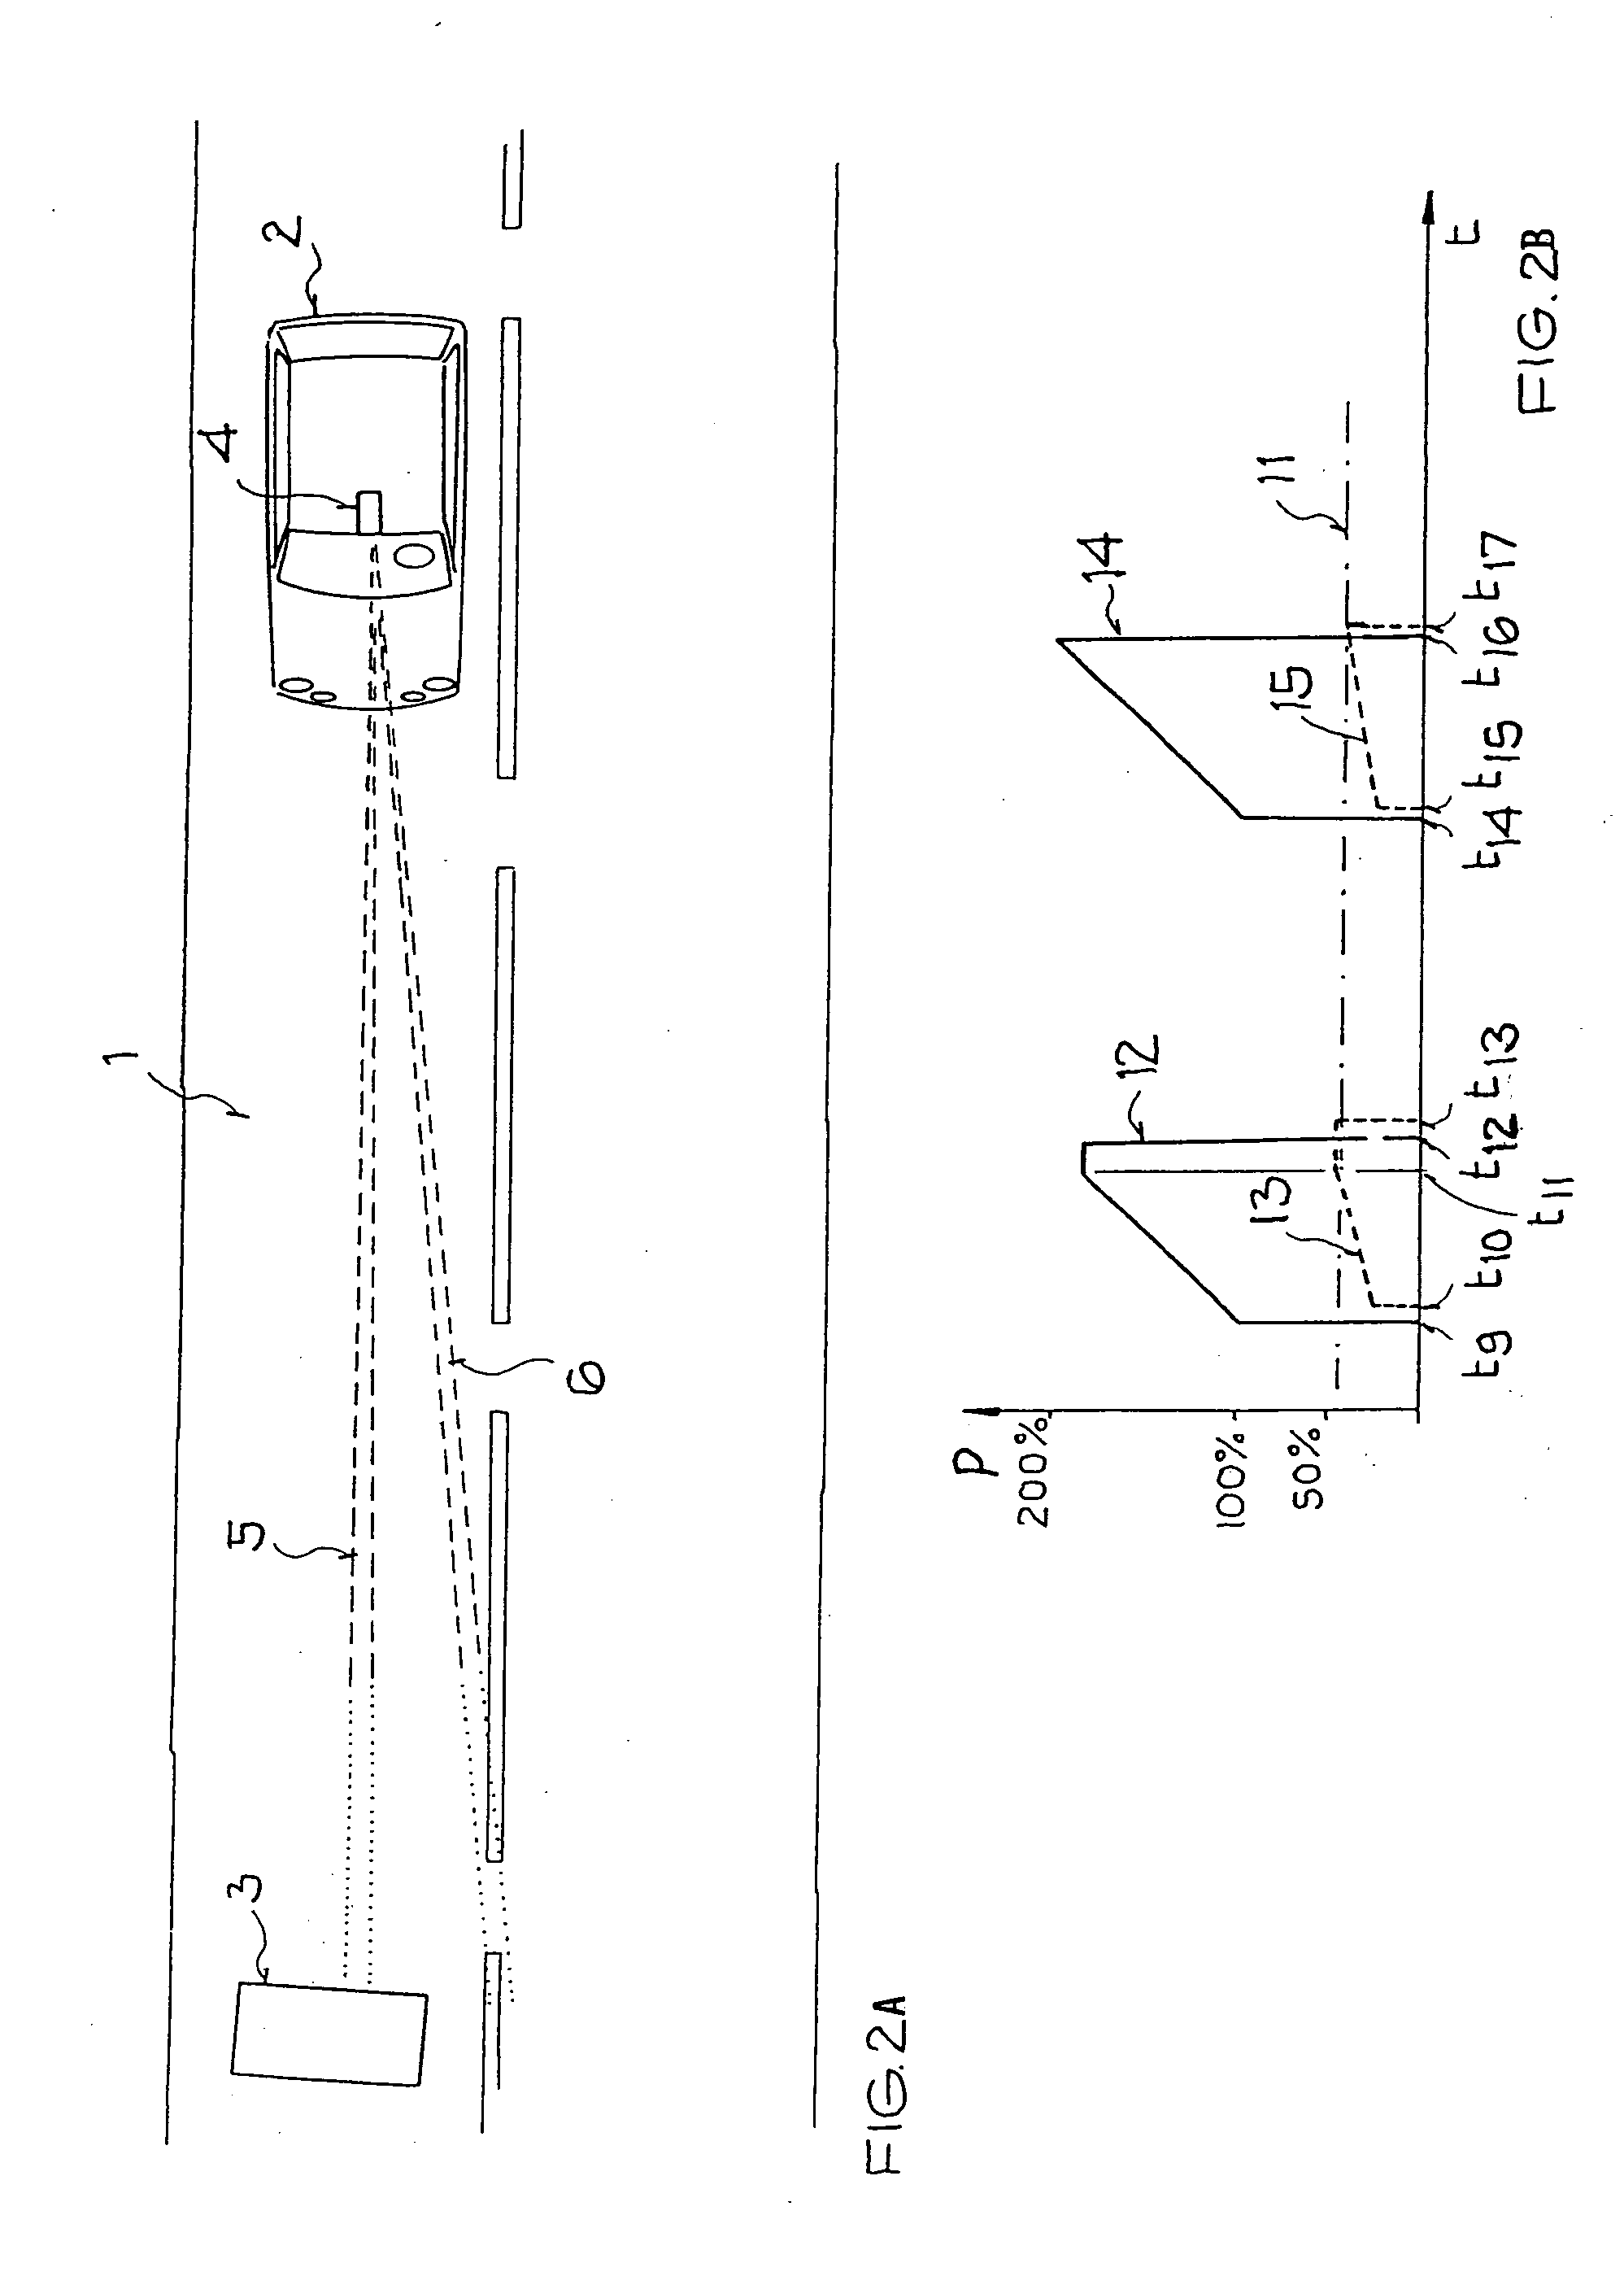 Method of operating an active obstacle warning system